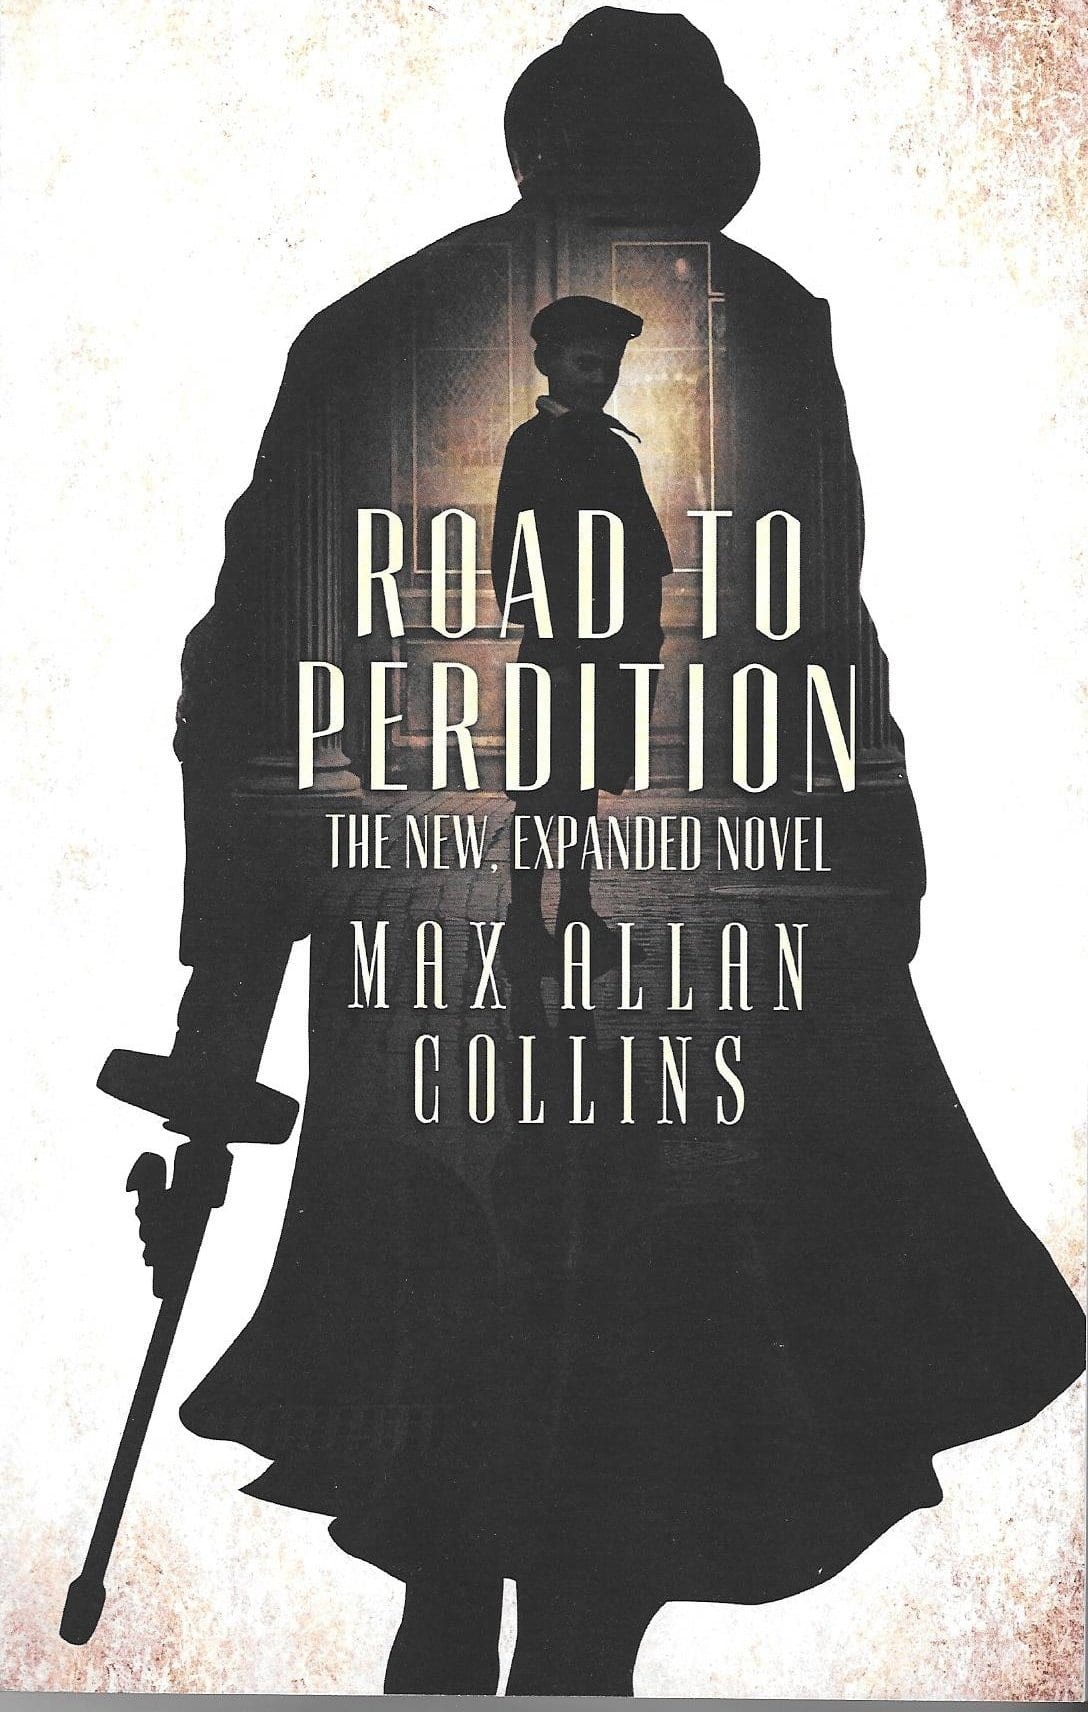 love of perdition book review